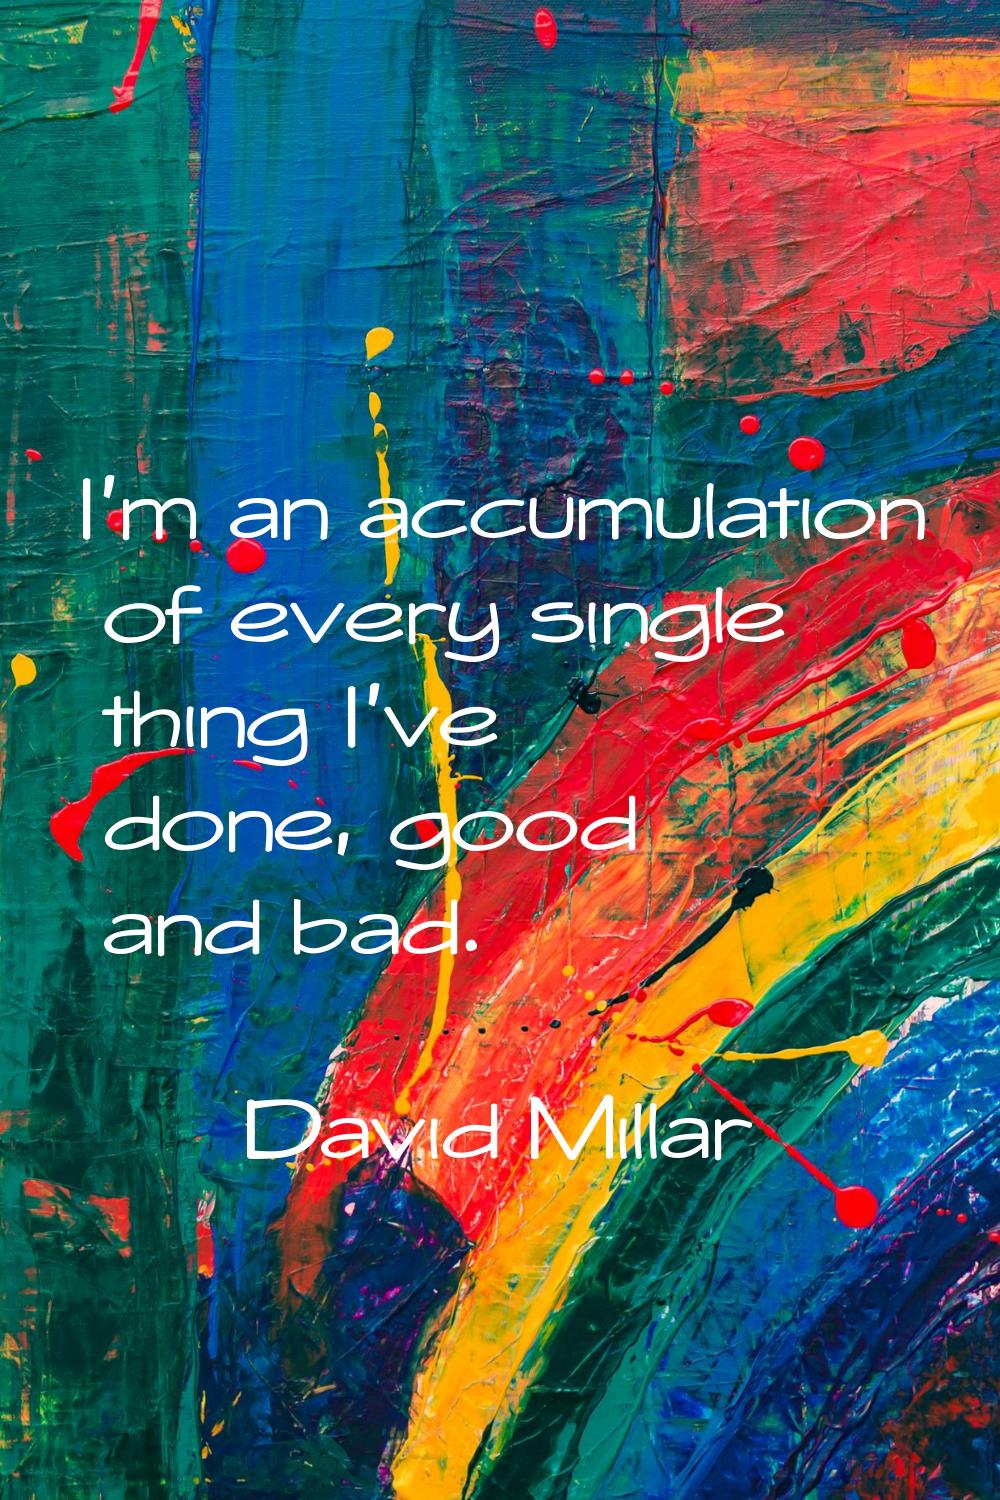 I'm an accumulation of every single thing I've done, good and bad.